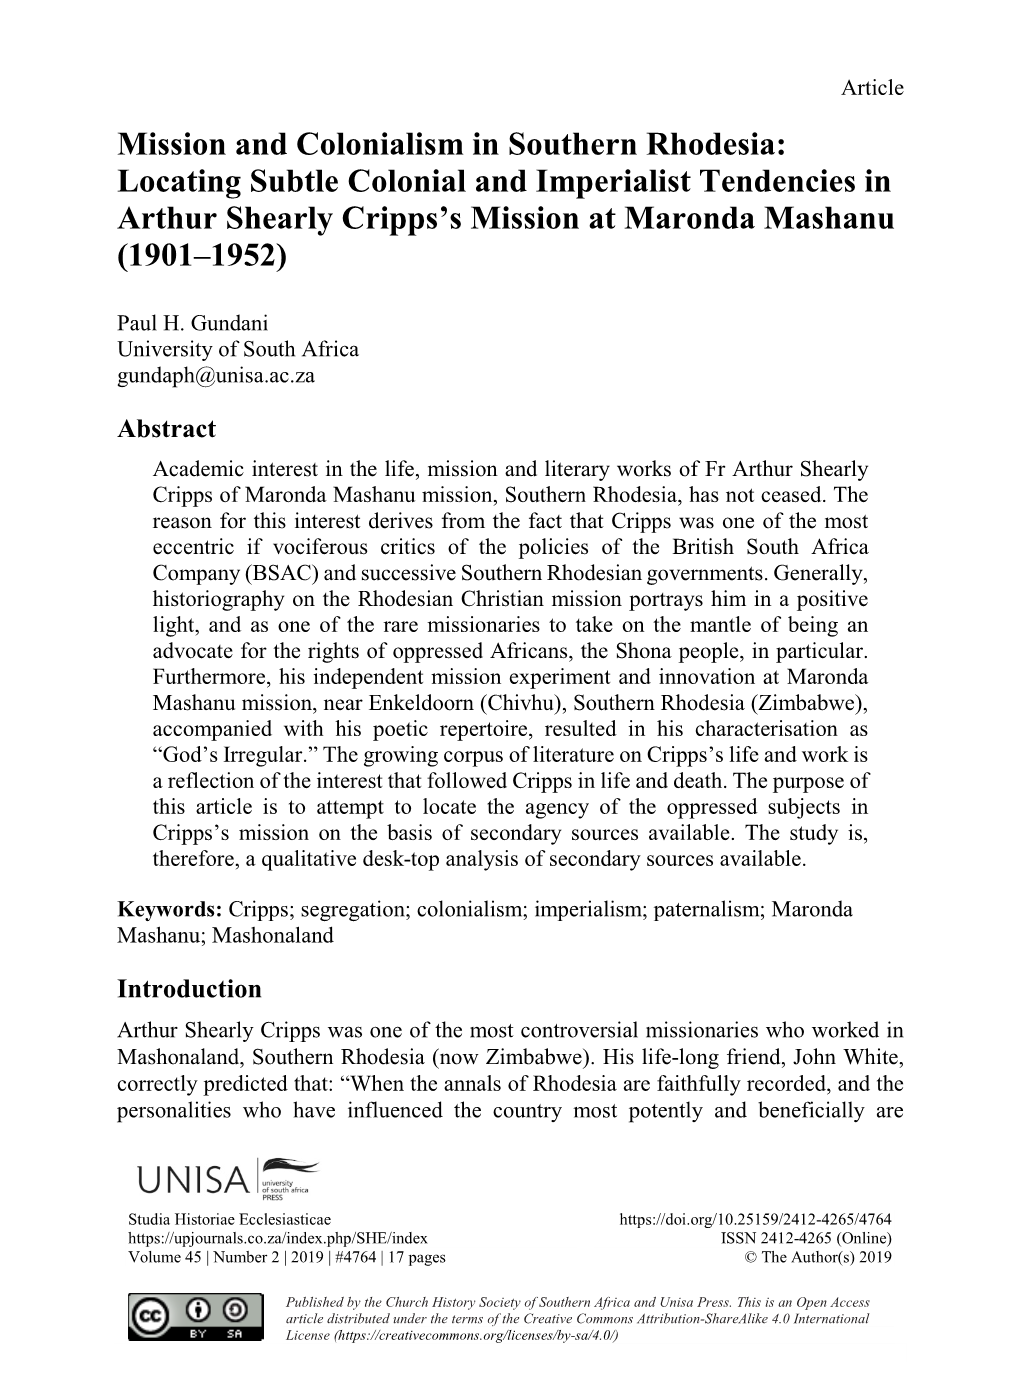 Mission and Colonialism in Southern Rhodesia: Locating Subtle Colonial and Imperialist Tendencies in Arthur Shearly Cripps’S Mission at Maronda Mashanu (1901–1952)